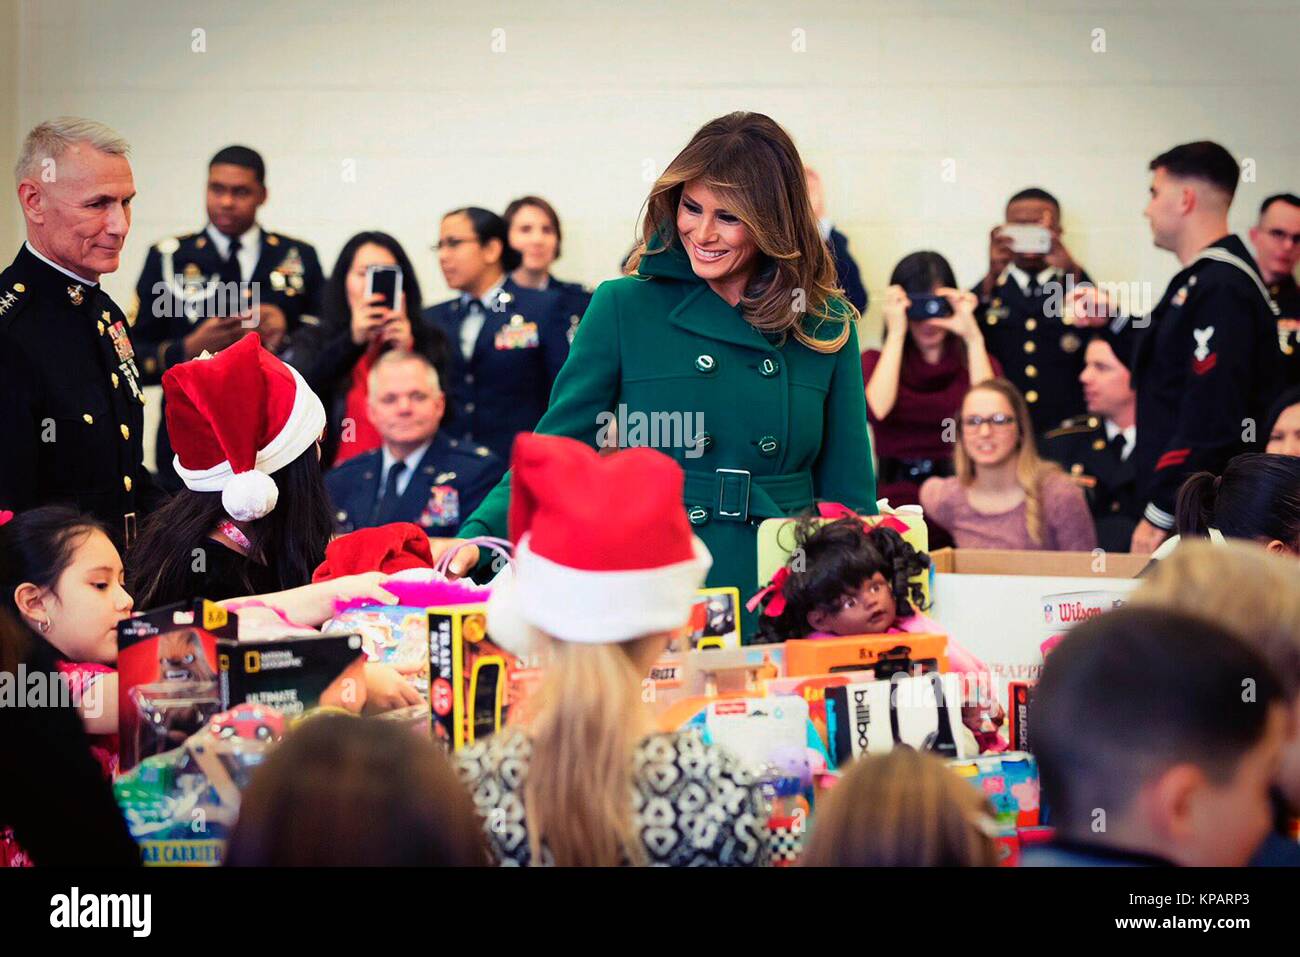 Washington, United States Of America. 14th Dec, 2017. U.S. First Lady Melania Trump helps pack toys during the annual Marine Corps Foundation Toys for Tots event at Joint Base Anacostia-Bolling December 13, 2017 in Washington, DC. The First Lady followed the longstanding tradition of other Firs Ladies in helping children make cards, sorted toys and honor the charity event.  Credit: Planetpix/Alamy Live News Stock Photo